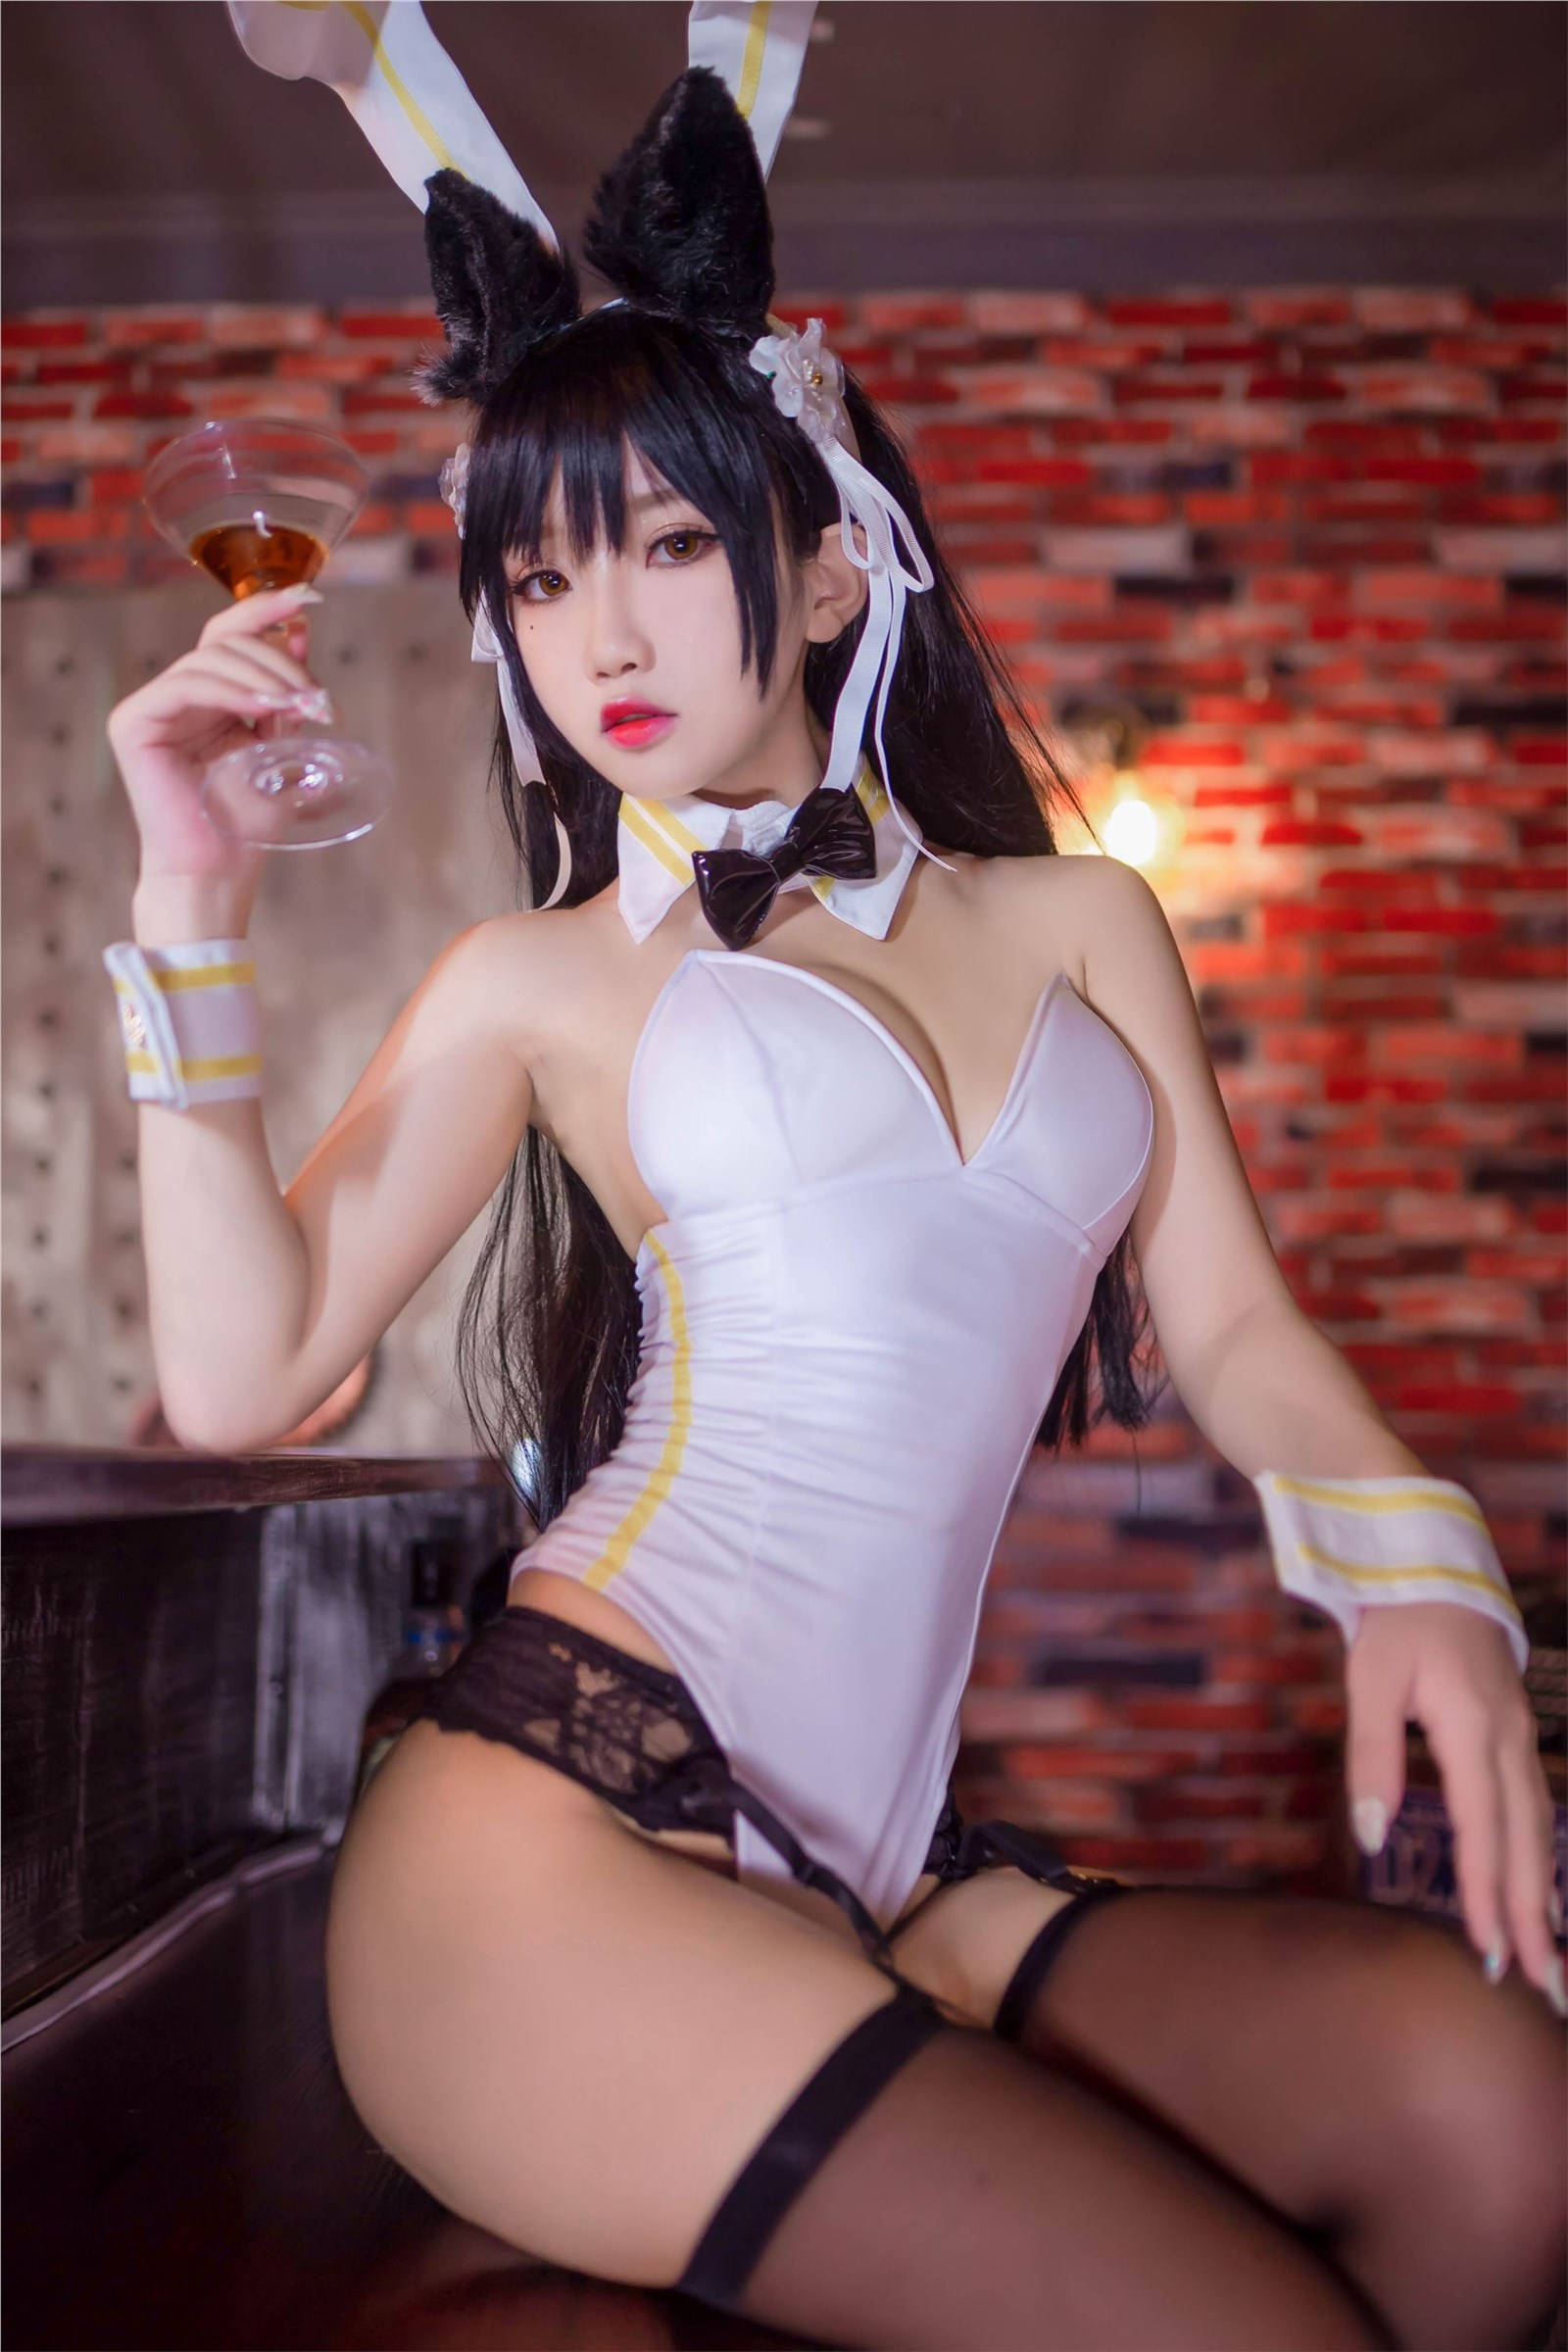 Cosplay is Yao in or not - bar Bunny(10)